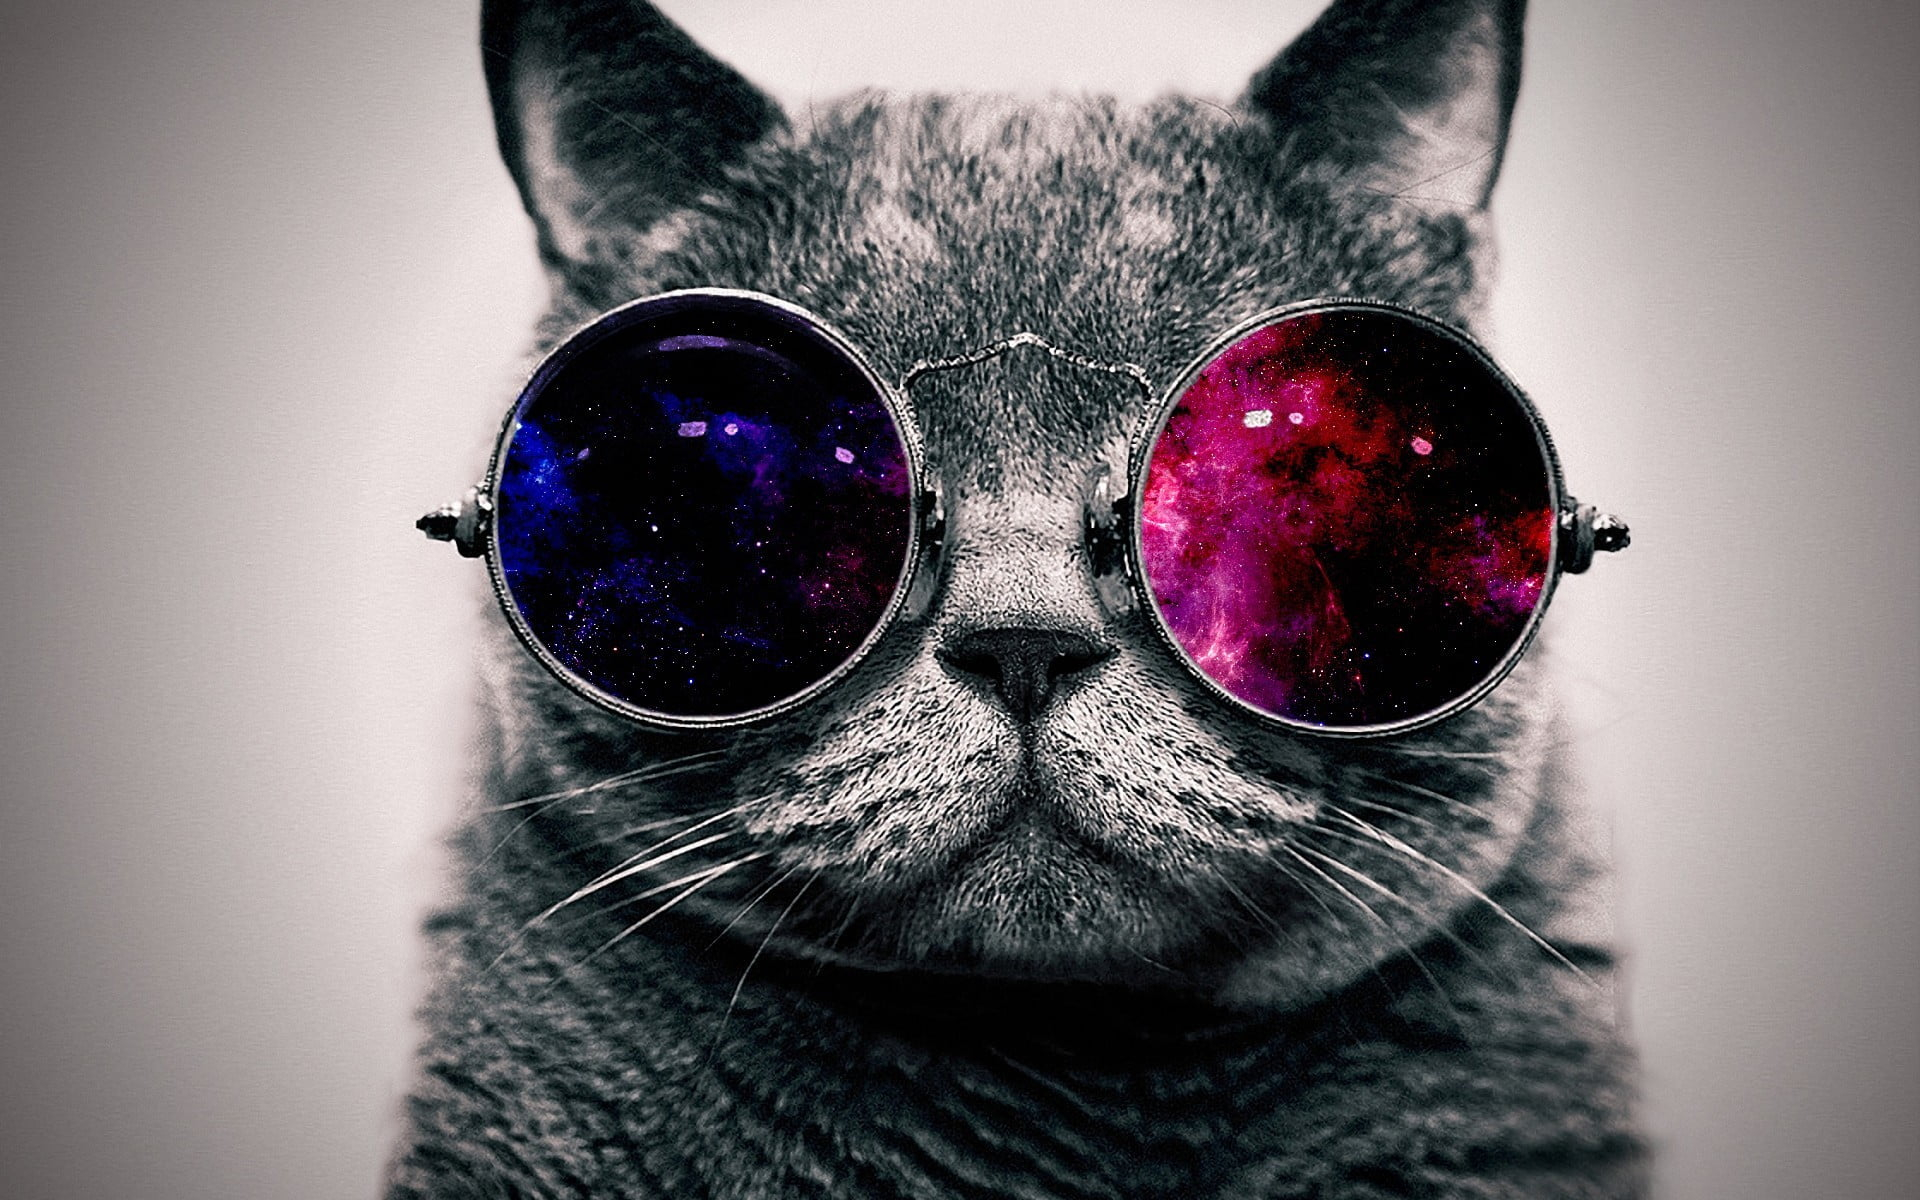 Grey cat and sunglasses, space, abstract, minimalism, animals wallpaper